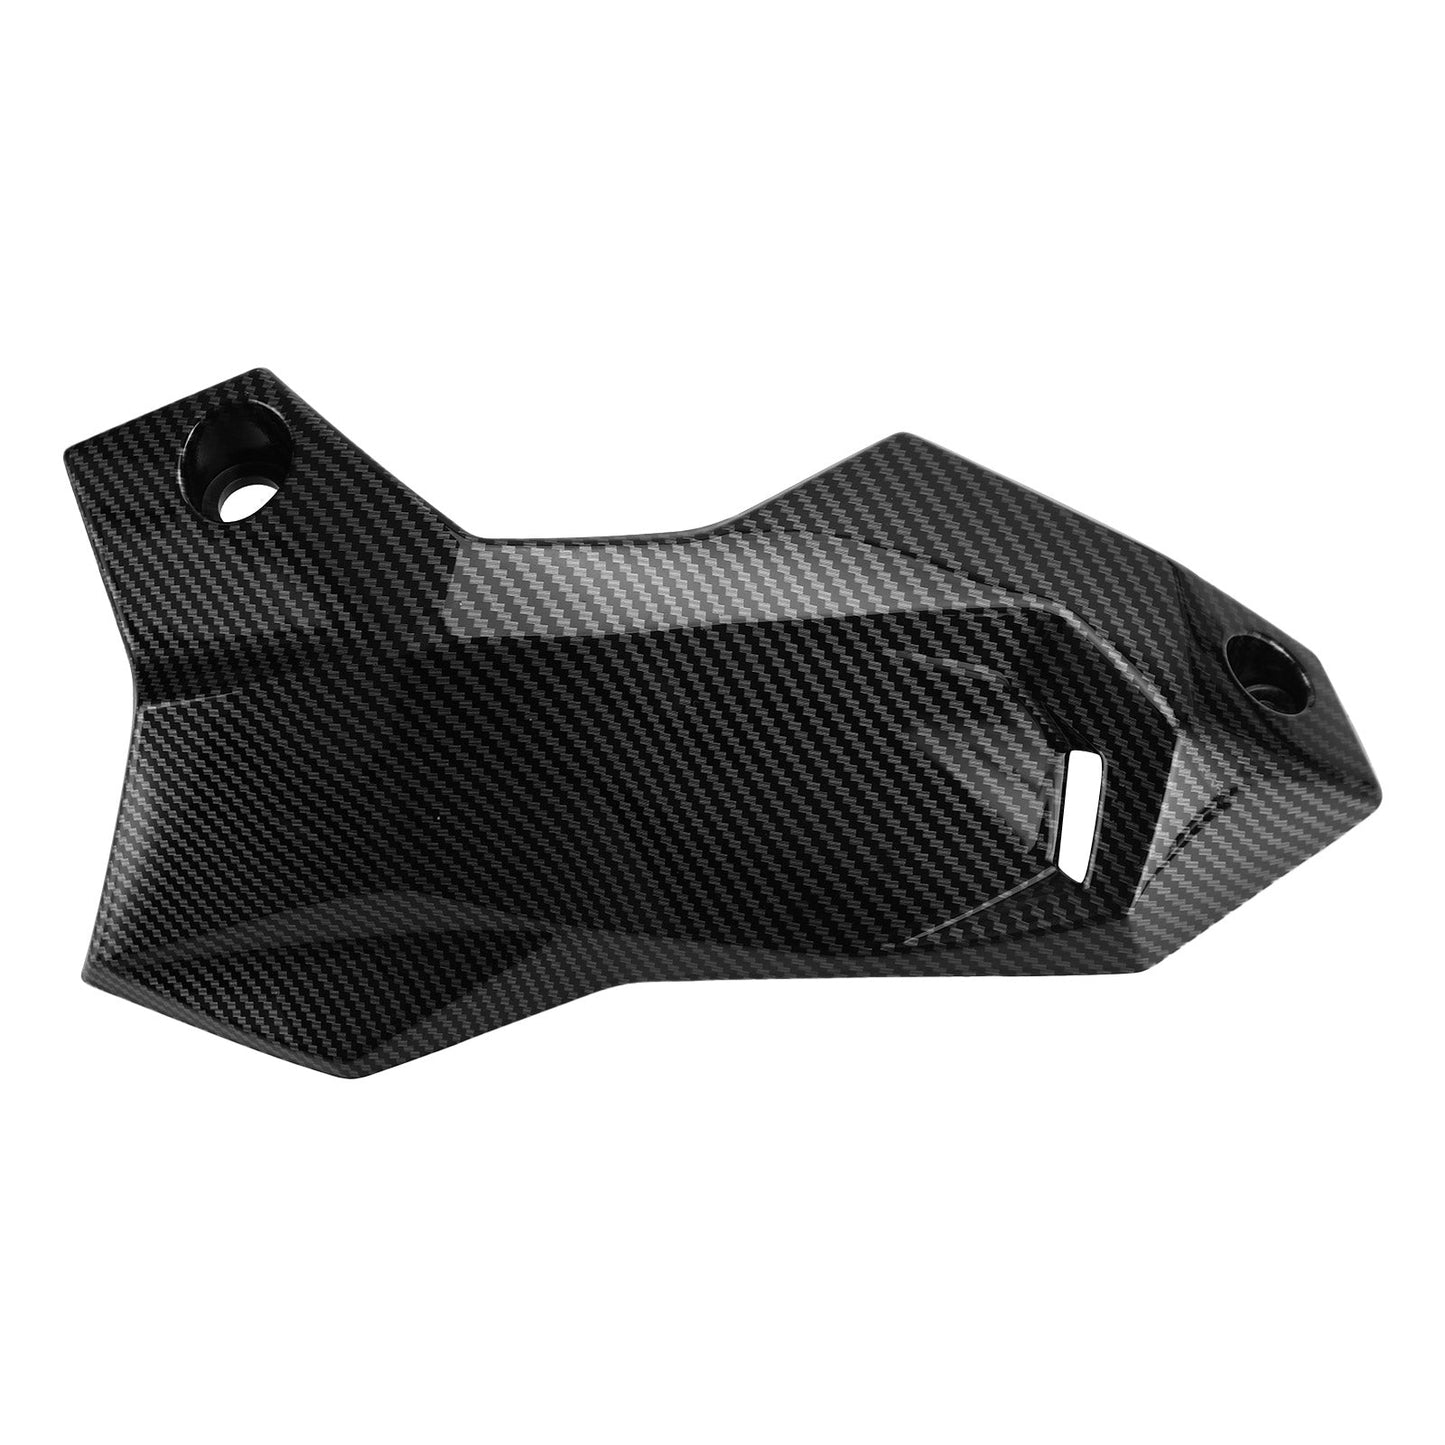 ABS Engine Lower Protection Cover Guard Fairing for KAWASAKI Z900 2020-2021